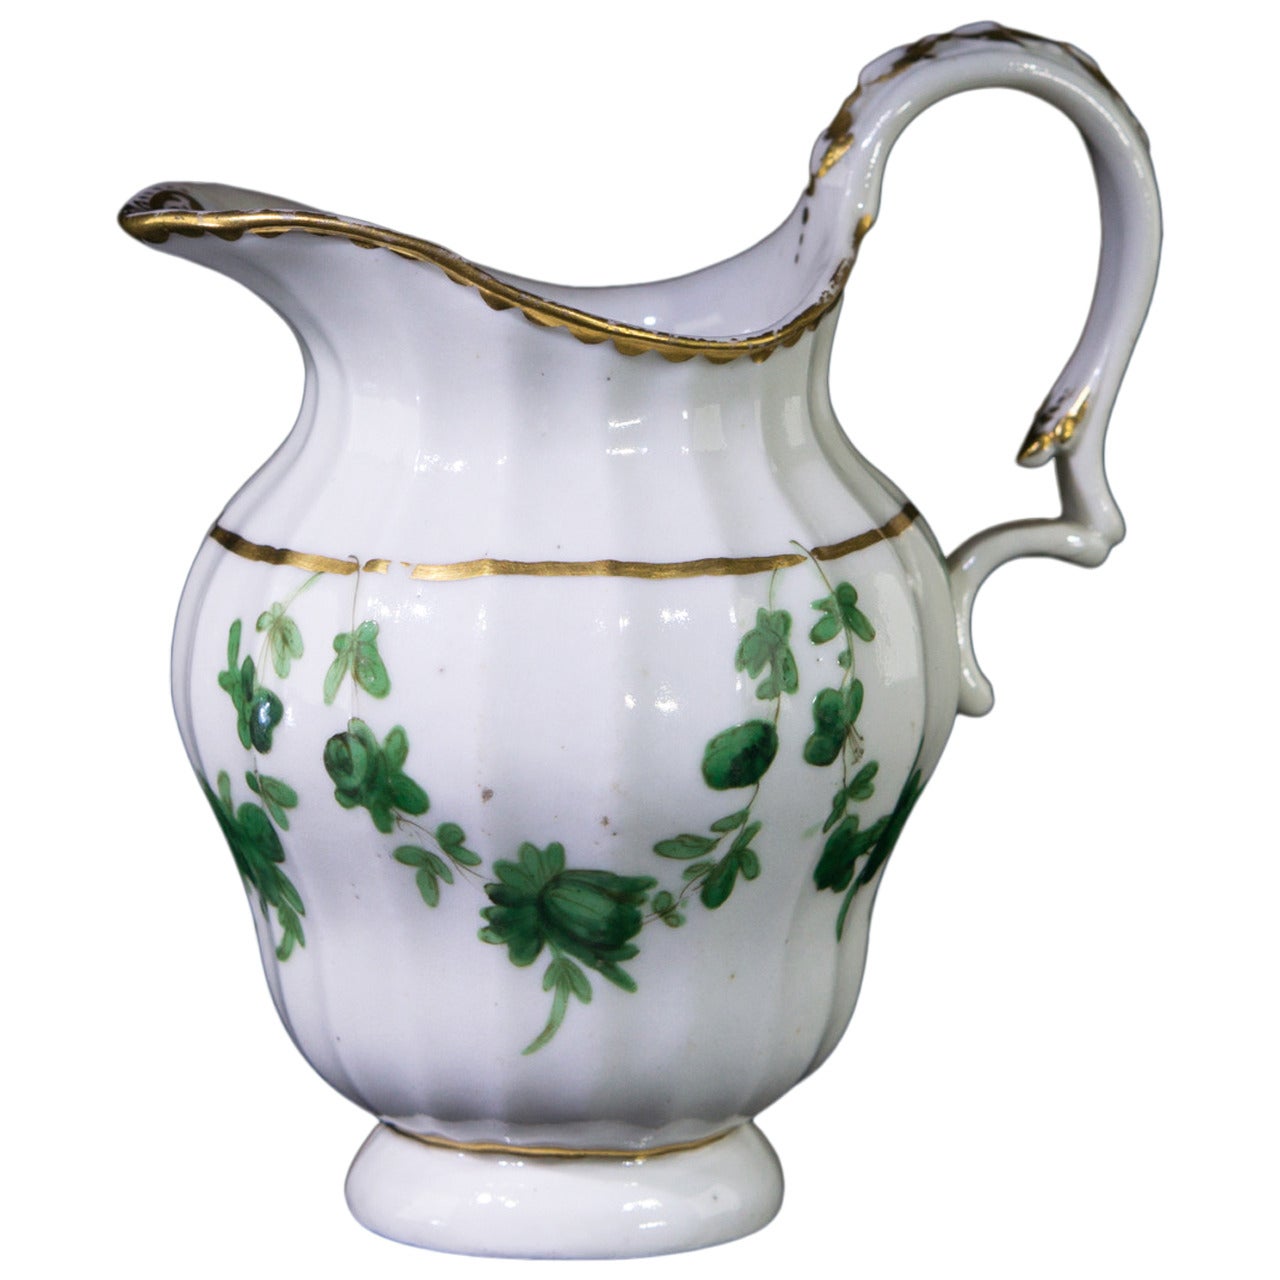 Champion’s Bristol Jug Decorated with Green Swags, circa 1775 For Sale